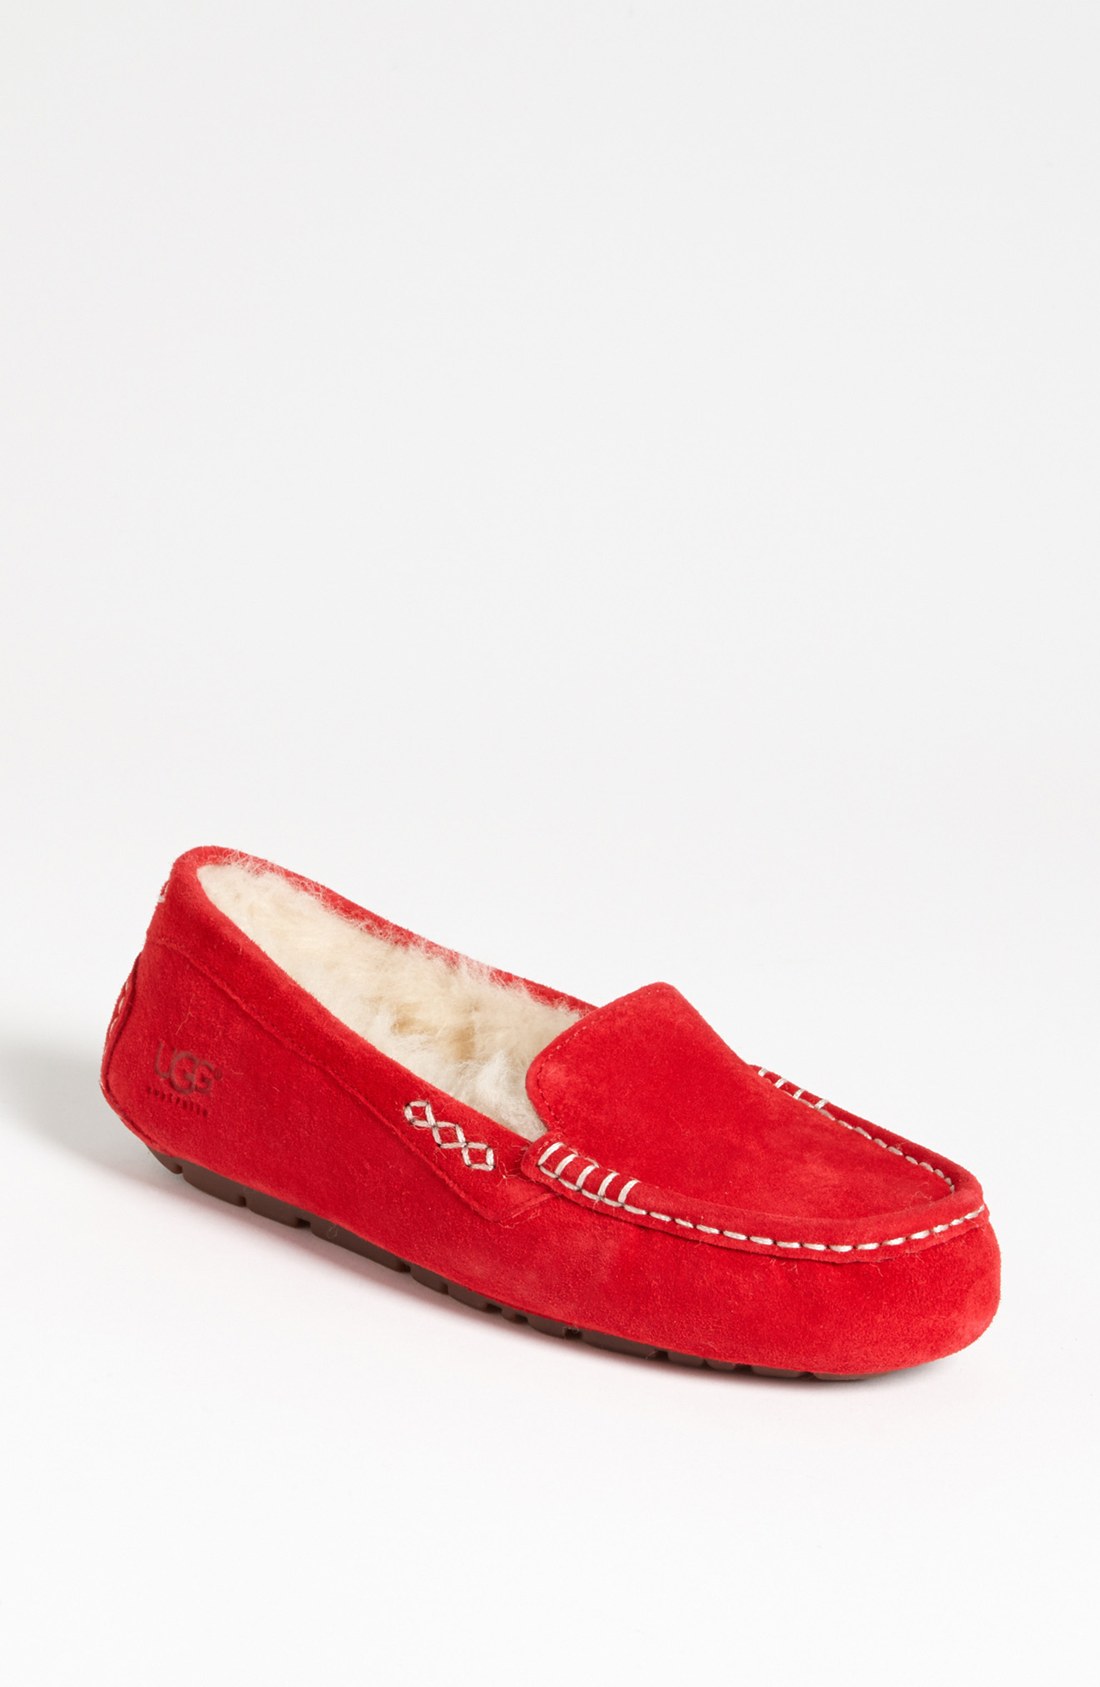 Ugg Ansley Slippers in Red (red light) | Lyst